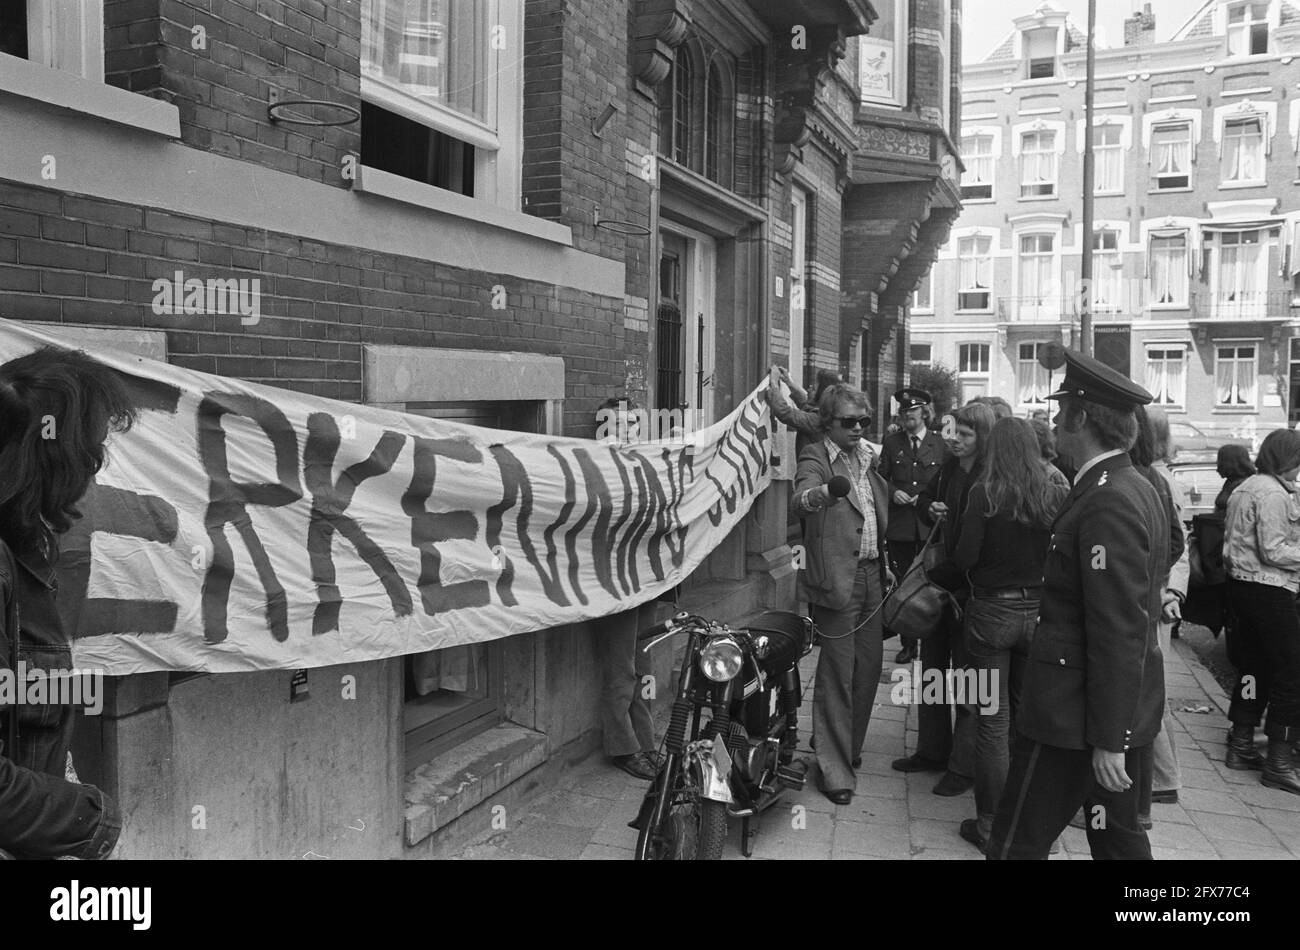 Action group tries to occupy PvdA party office in Amsterdam in connection with recognition of Guinea Bissau, demonstrators attach banner to wall of party office/, 28 May 1974, Action groups, occupations, demonstrators, banners, The Netherlands, 20th century press agency photo, news to remember, documentary, historic photography 1945-1990, visual stories, human history of the Twentieth Century, capturing moments in time Stock Photo